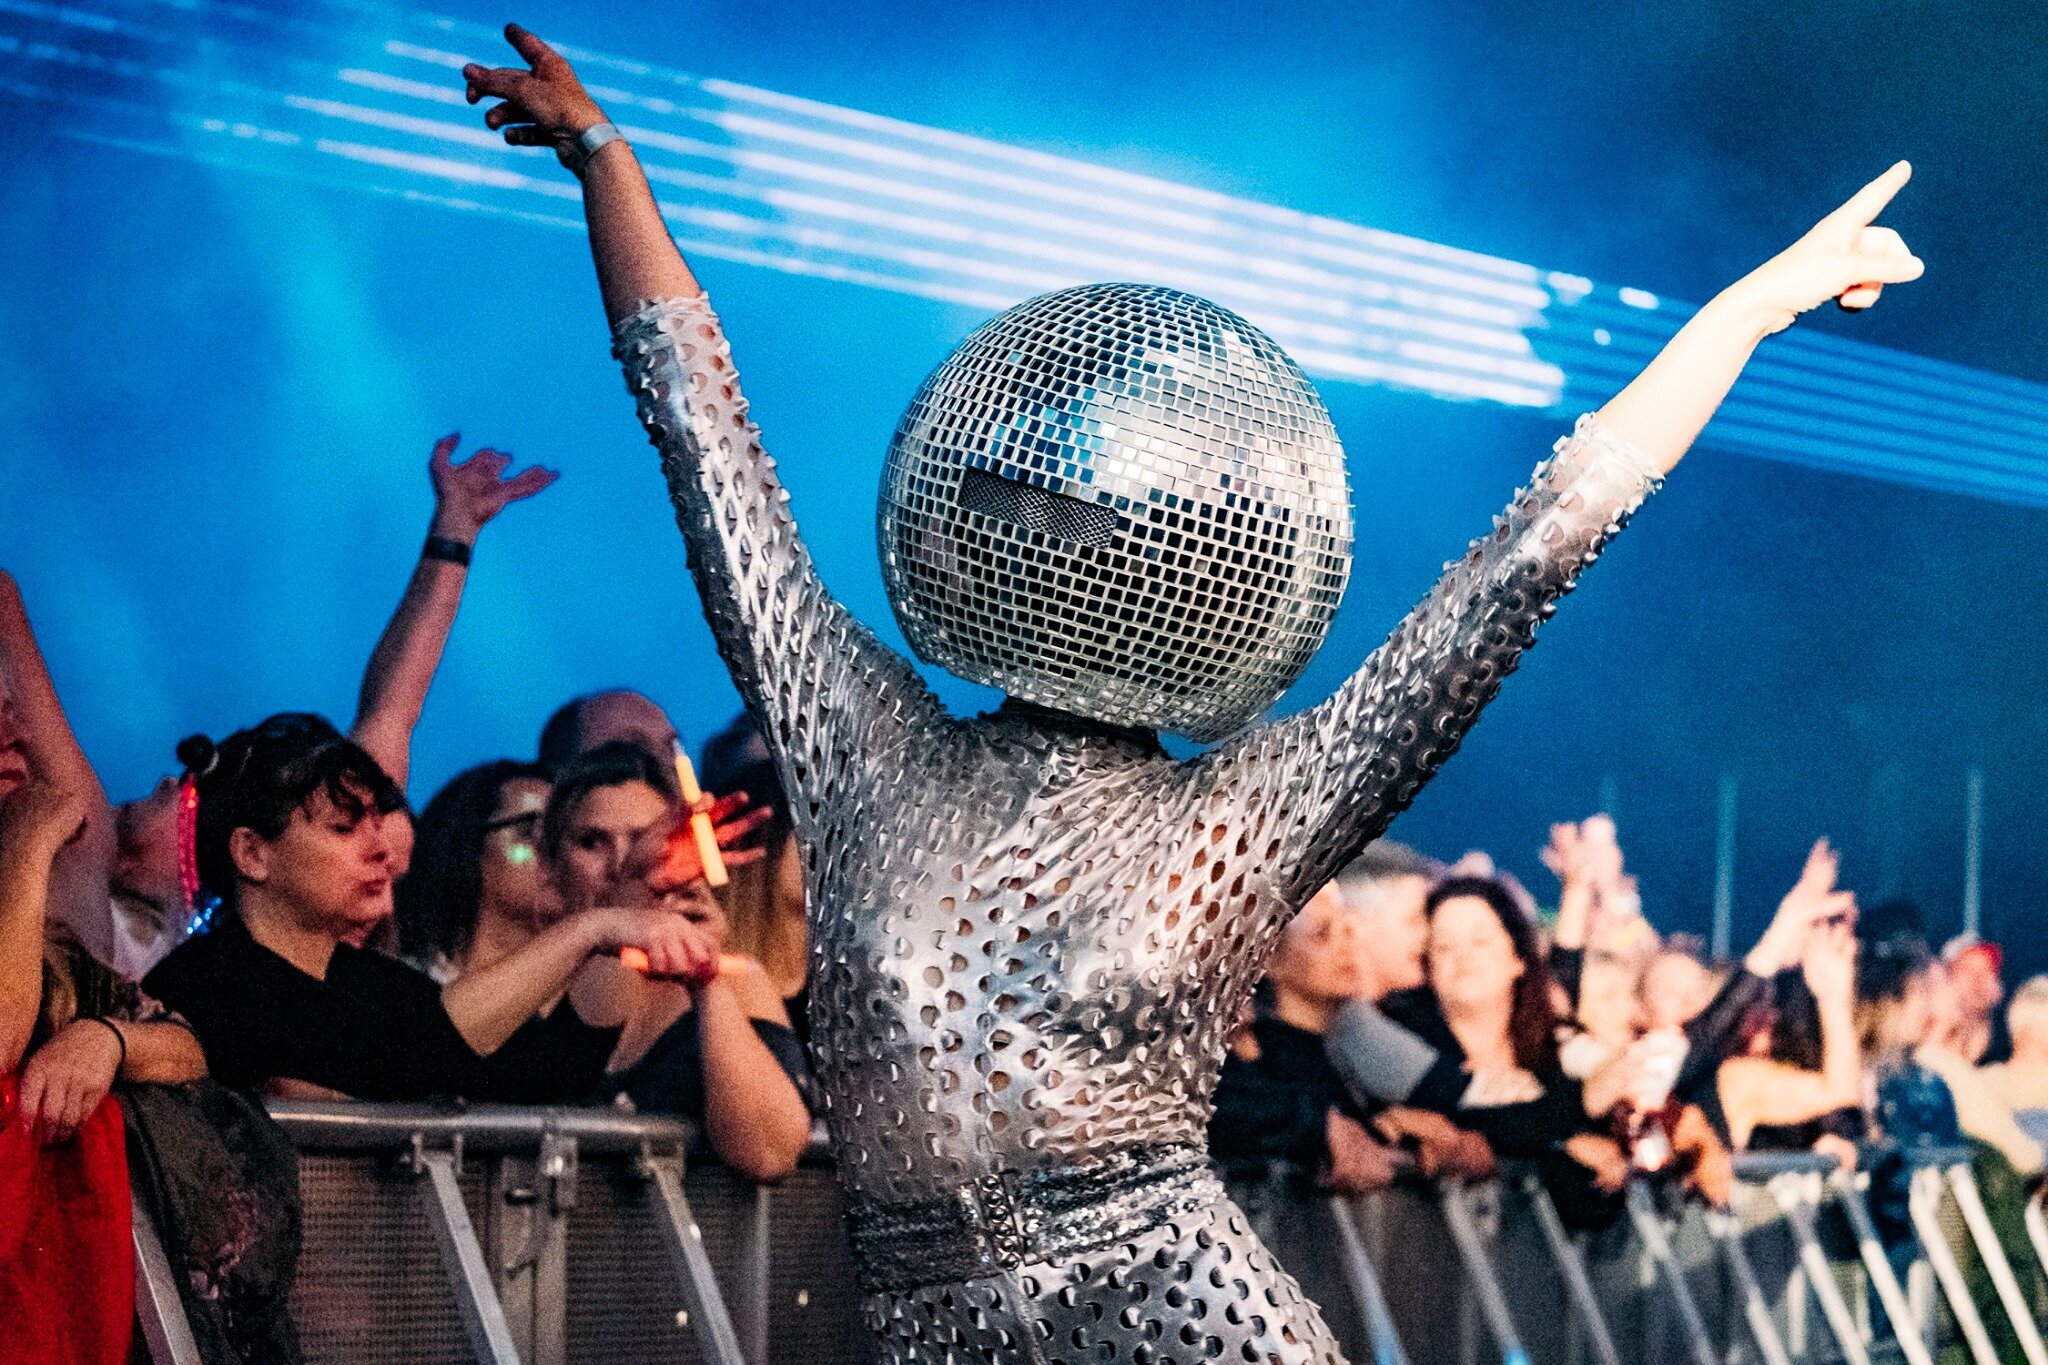 Disco ball heads at event